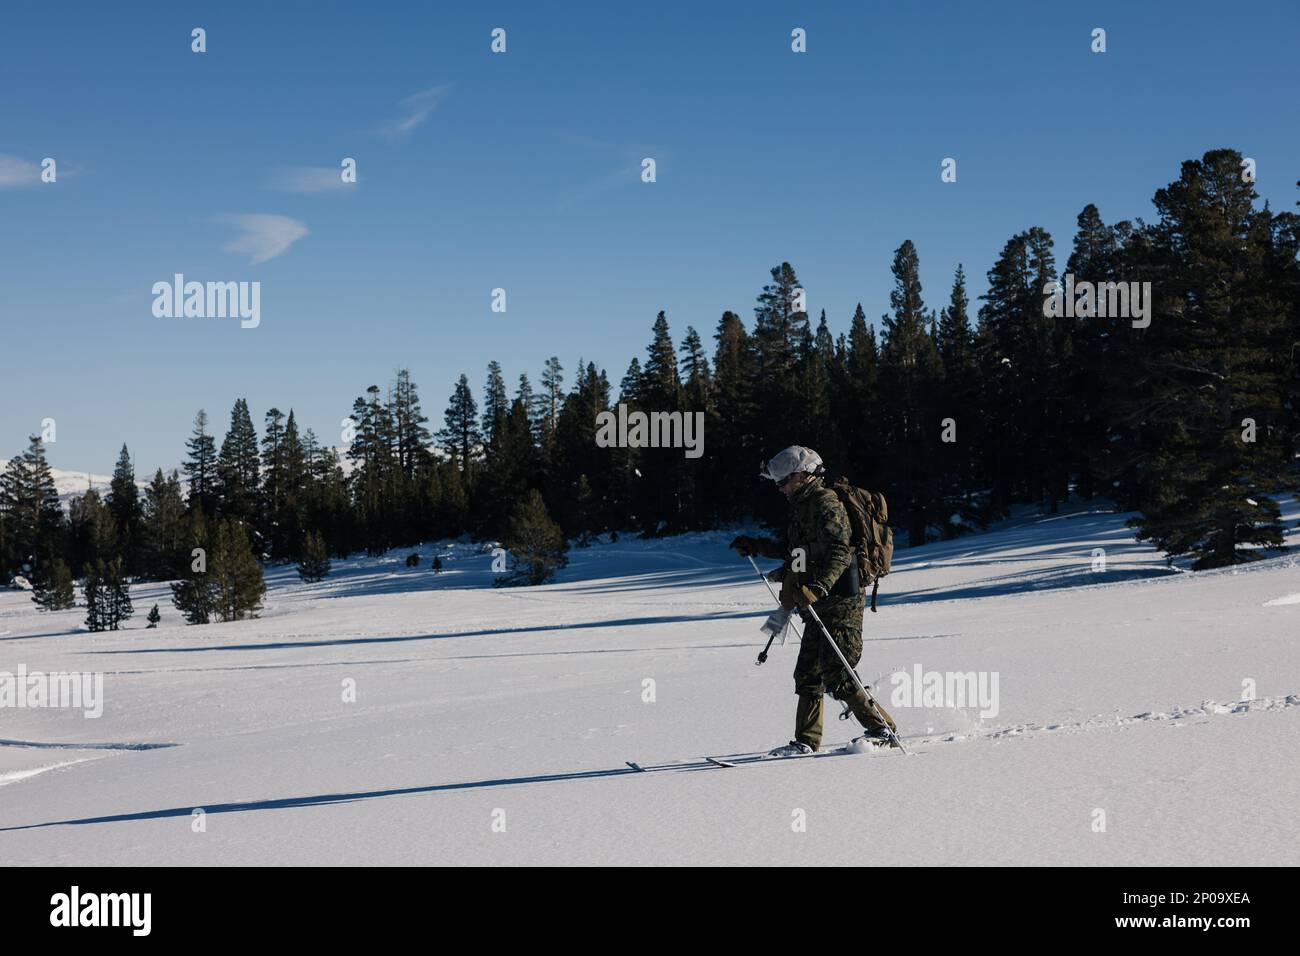 A U.S. Marine with 2nd Battalion, 8th Marine Regiment, 2nd Marine Division, practices skiing techniques during Mountain Warfare Training Exercise (MTX) 2-23 at Marine Corps Mountain Warfare Training Center, Bridgeport, California, Jan. 28, 2023. MTX, the first training evolution of Service Level Training Exercise 2-23, teaches Marines how to survive and operate in mountainous environments. (U.S. Marine Corps photo by Cpl. Andrew Bray) Stock Photo